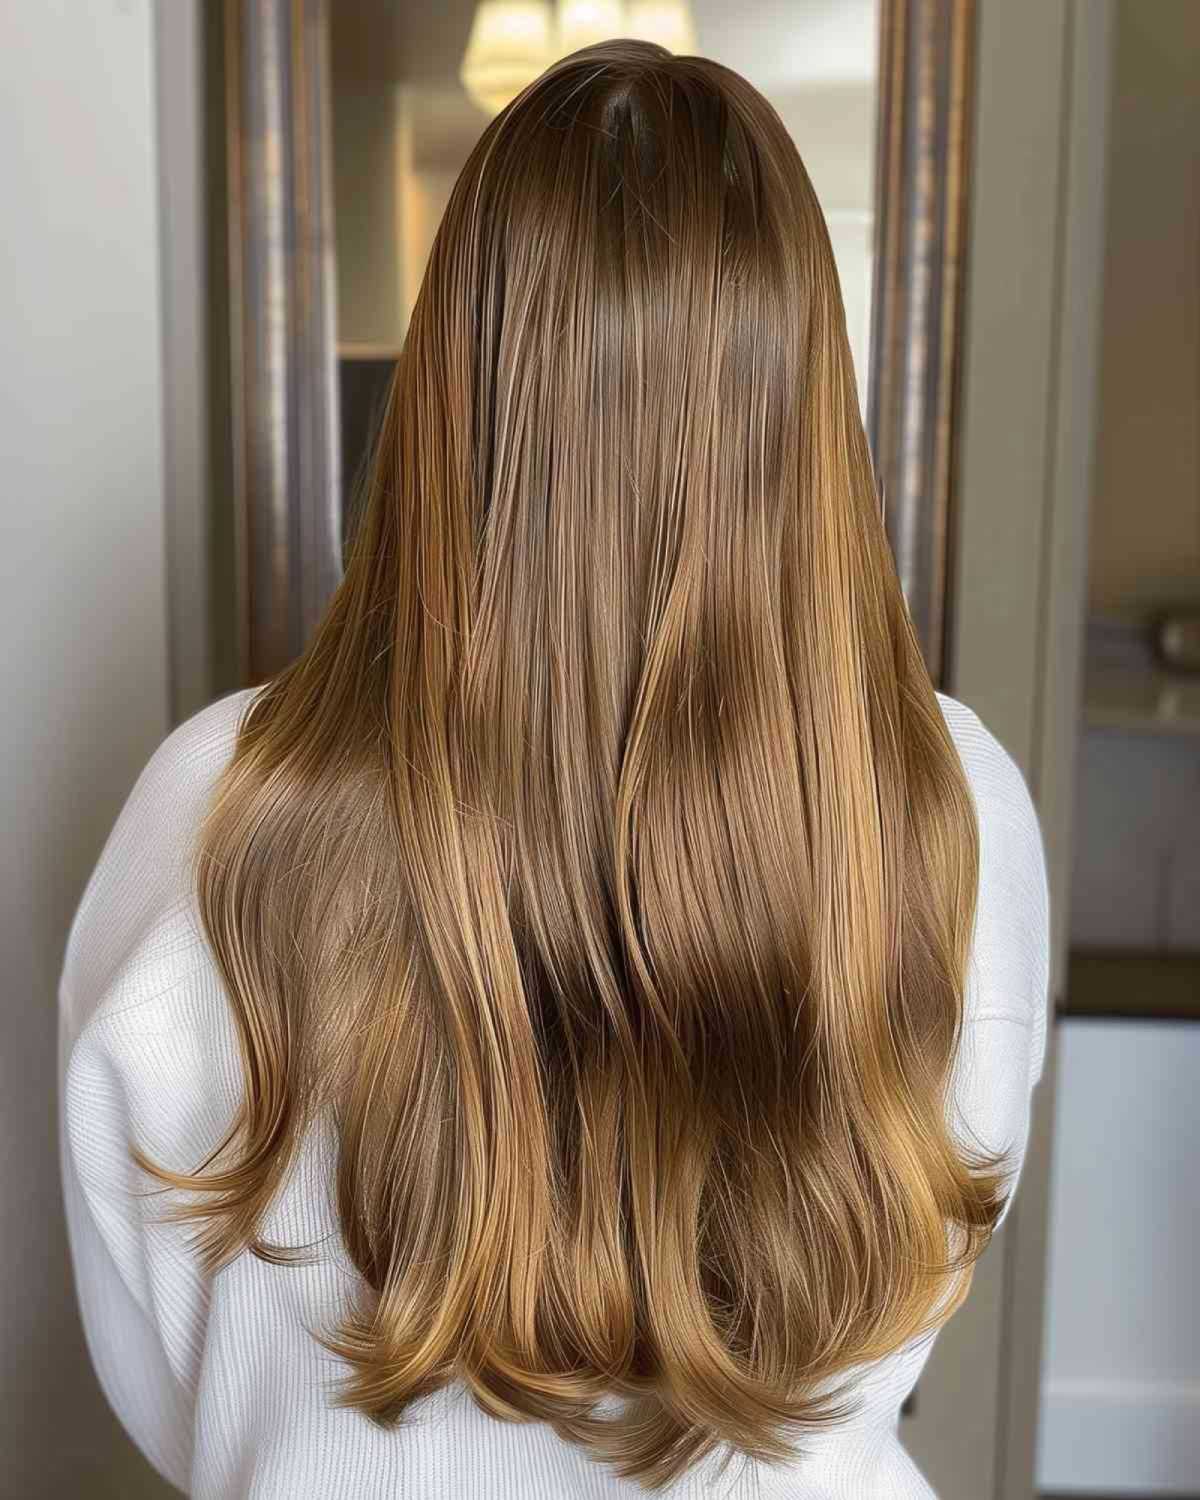 Long honey brown hair with sun-kissed highlights and soft waves